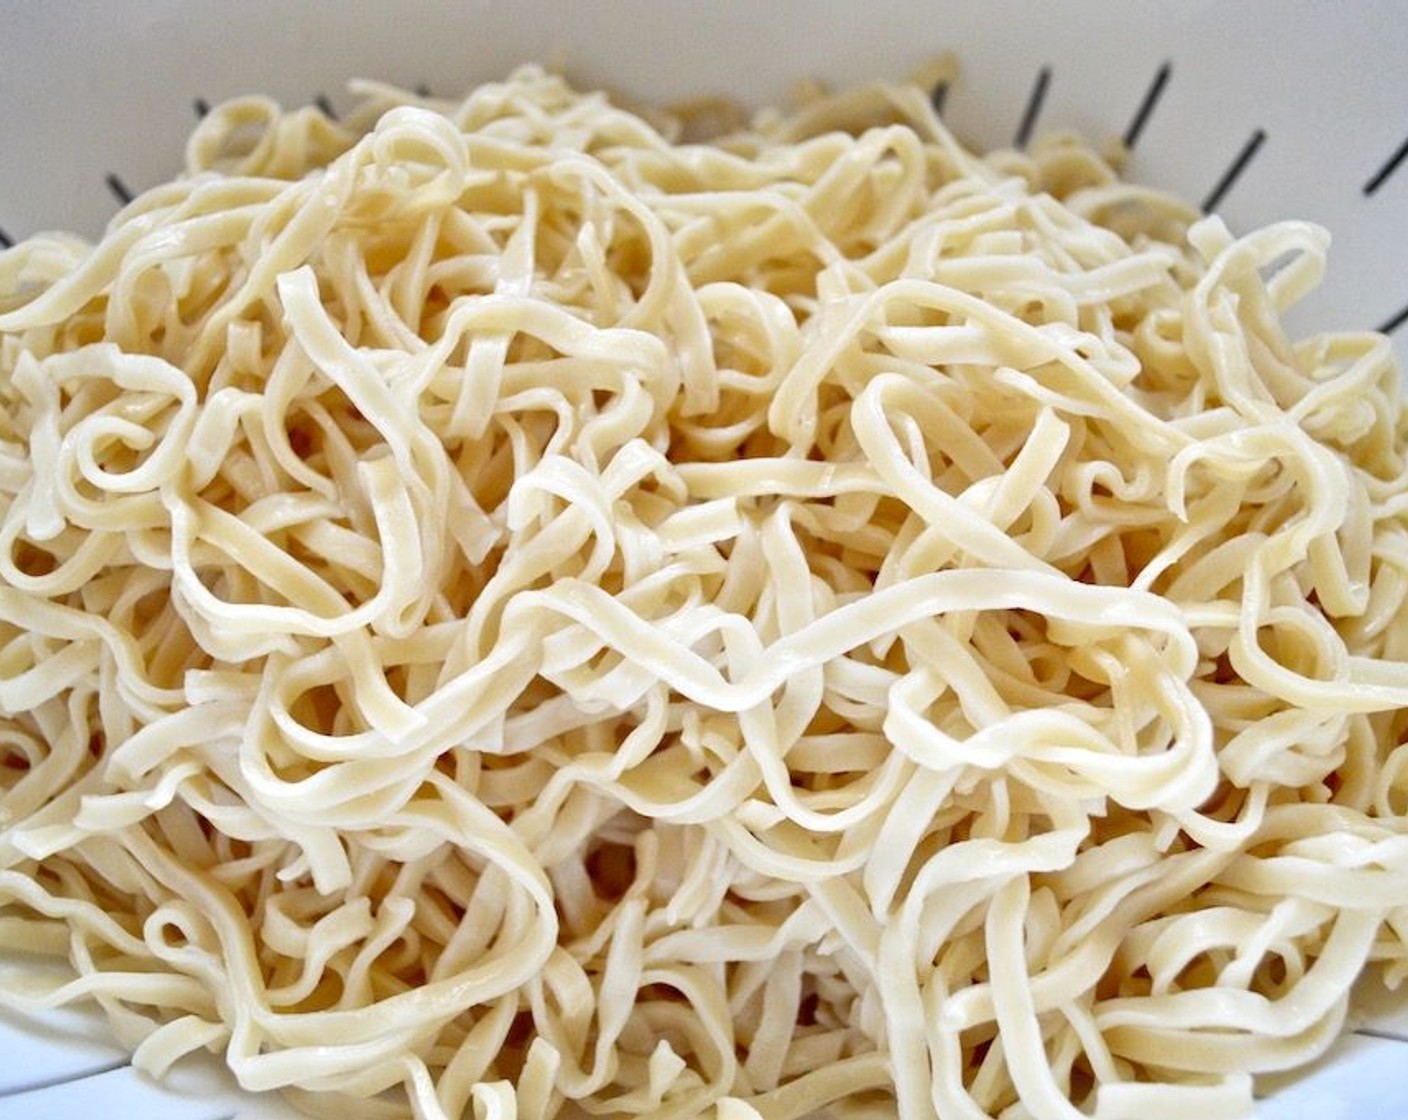 step 3 Boil the Flat Rice Noodles (1 lb) for about 3-4 minutes, just until tender. Refer to the package directions for best results. Drain them and rinse them thoroughly in cold water to rinse off the excess starch. That way they don't get gummy.